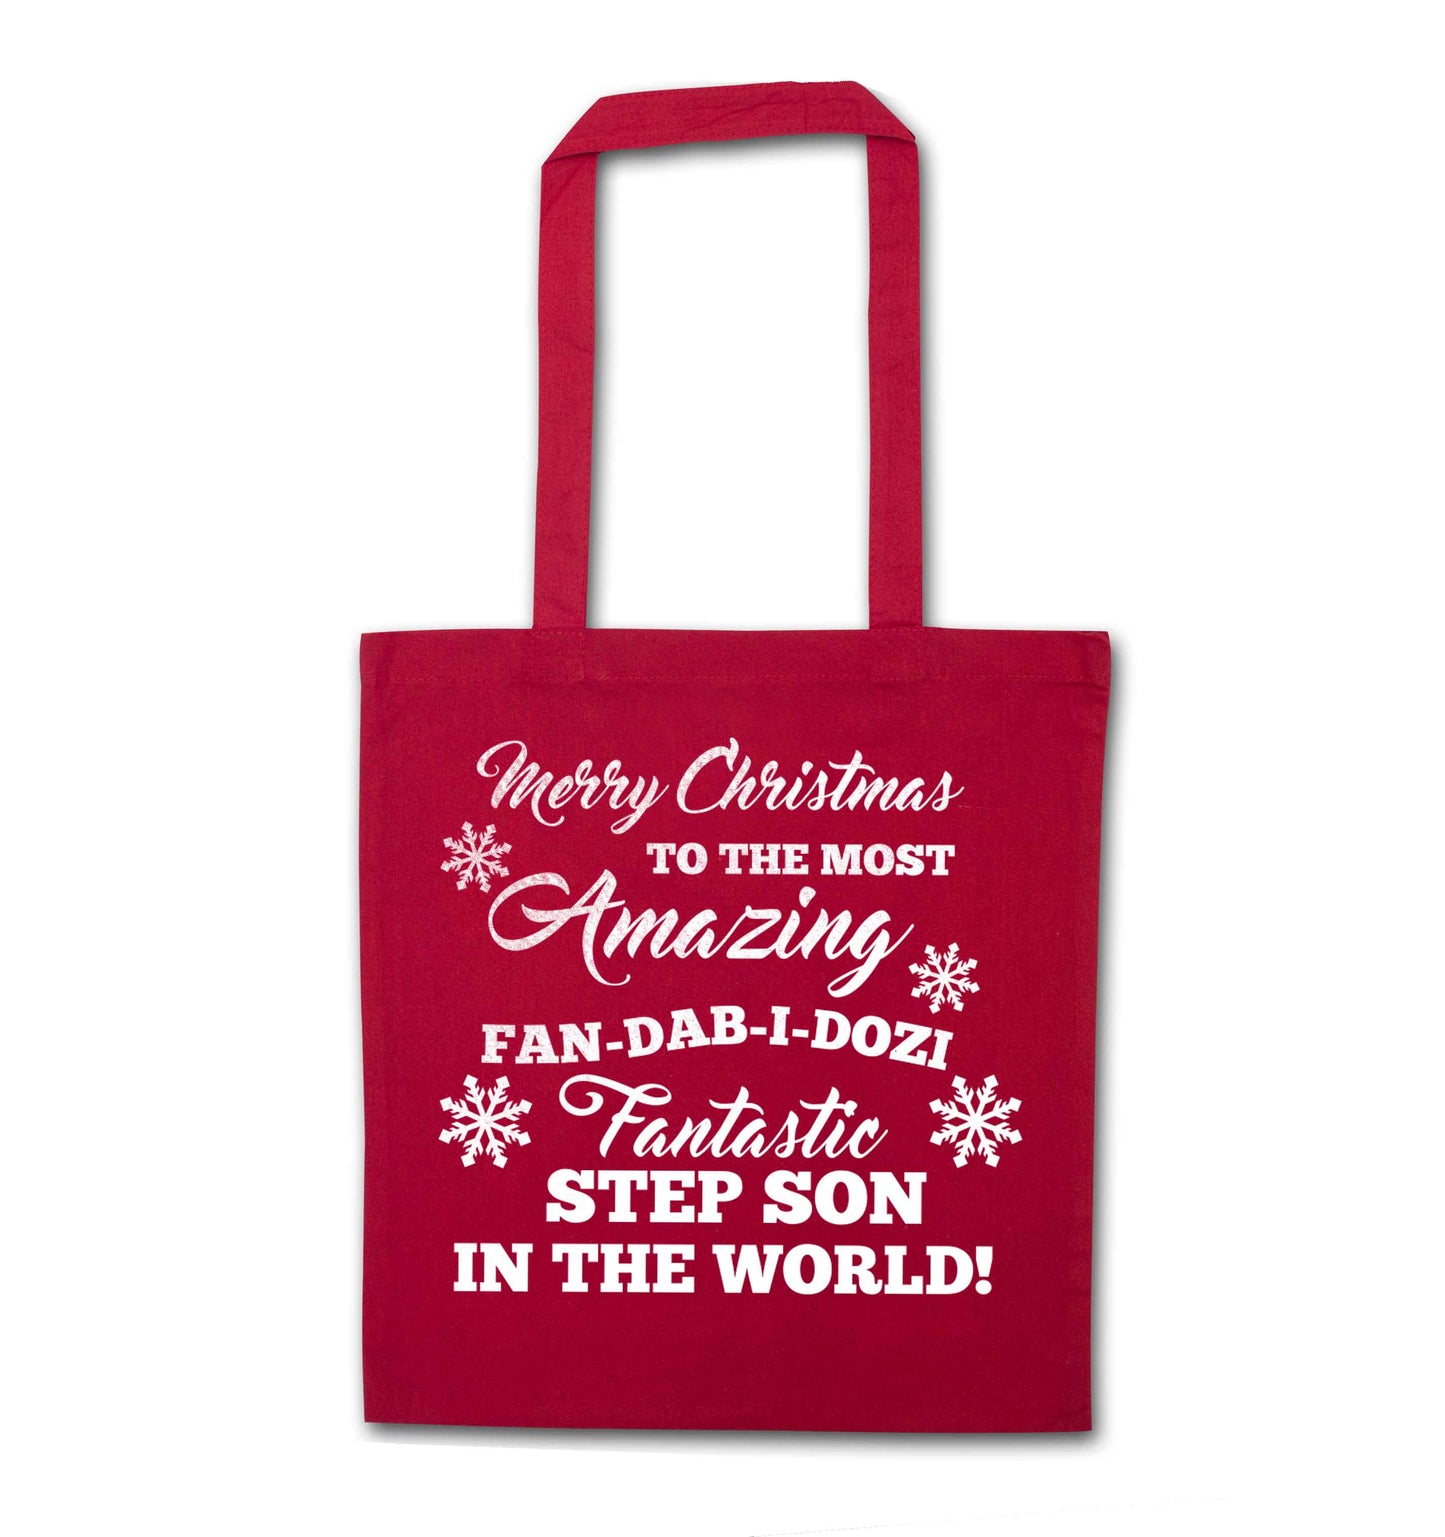 Merry Christmas to the most amazing fan-dab-i-dozi fantasic Step Son in the world red tote bag